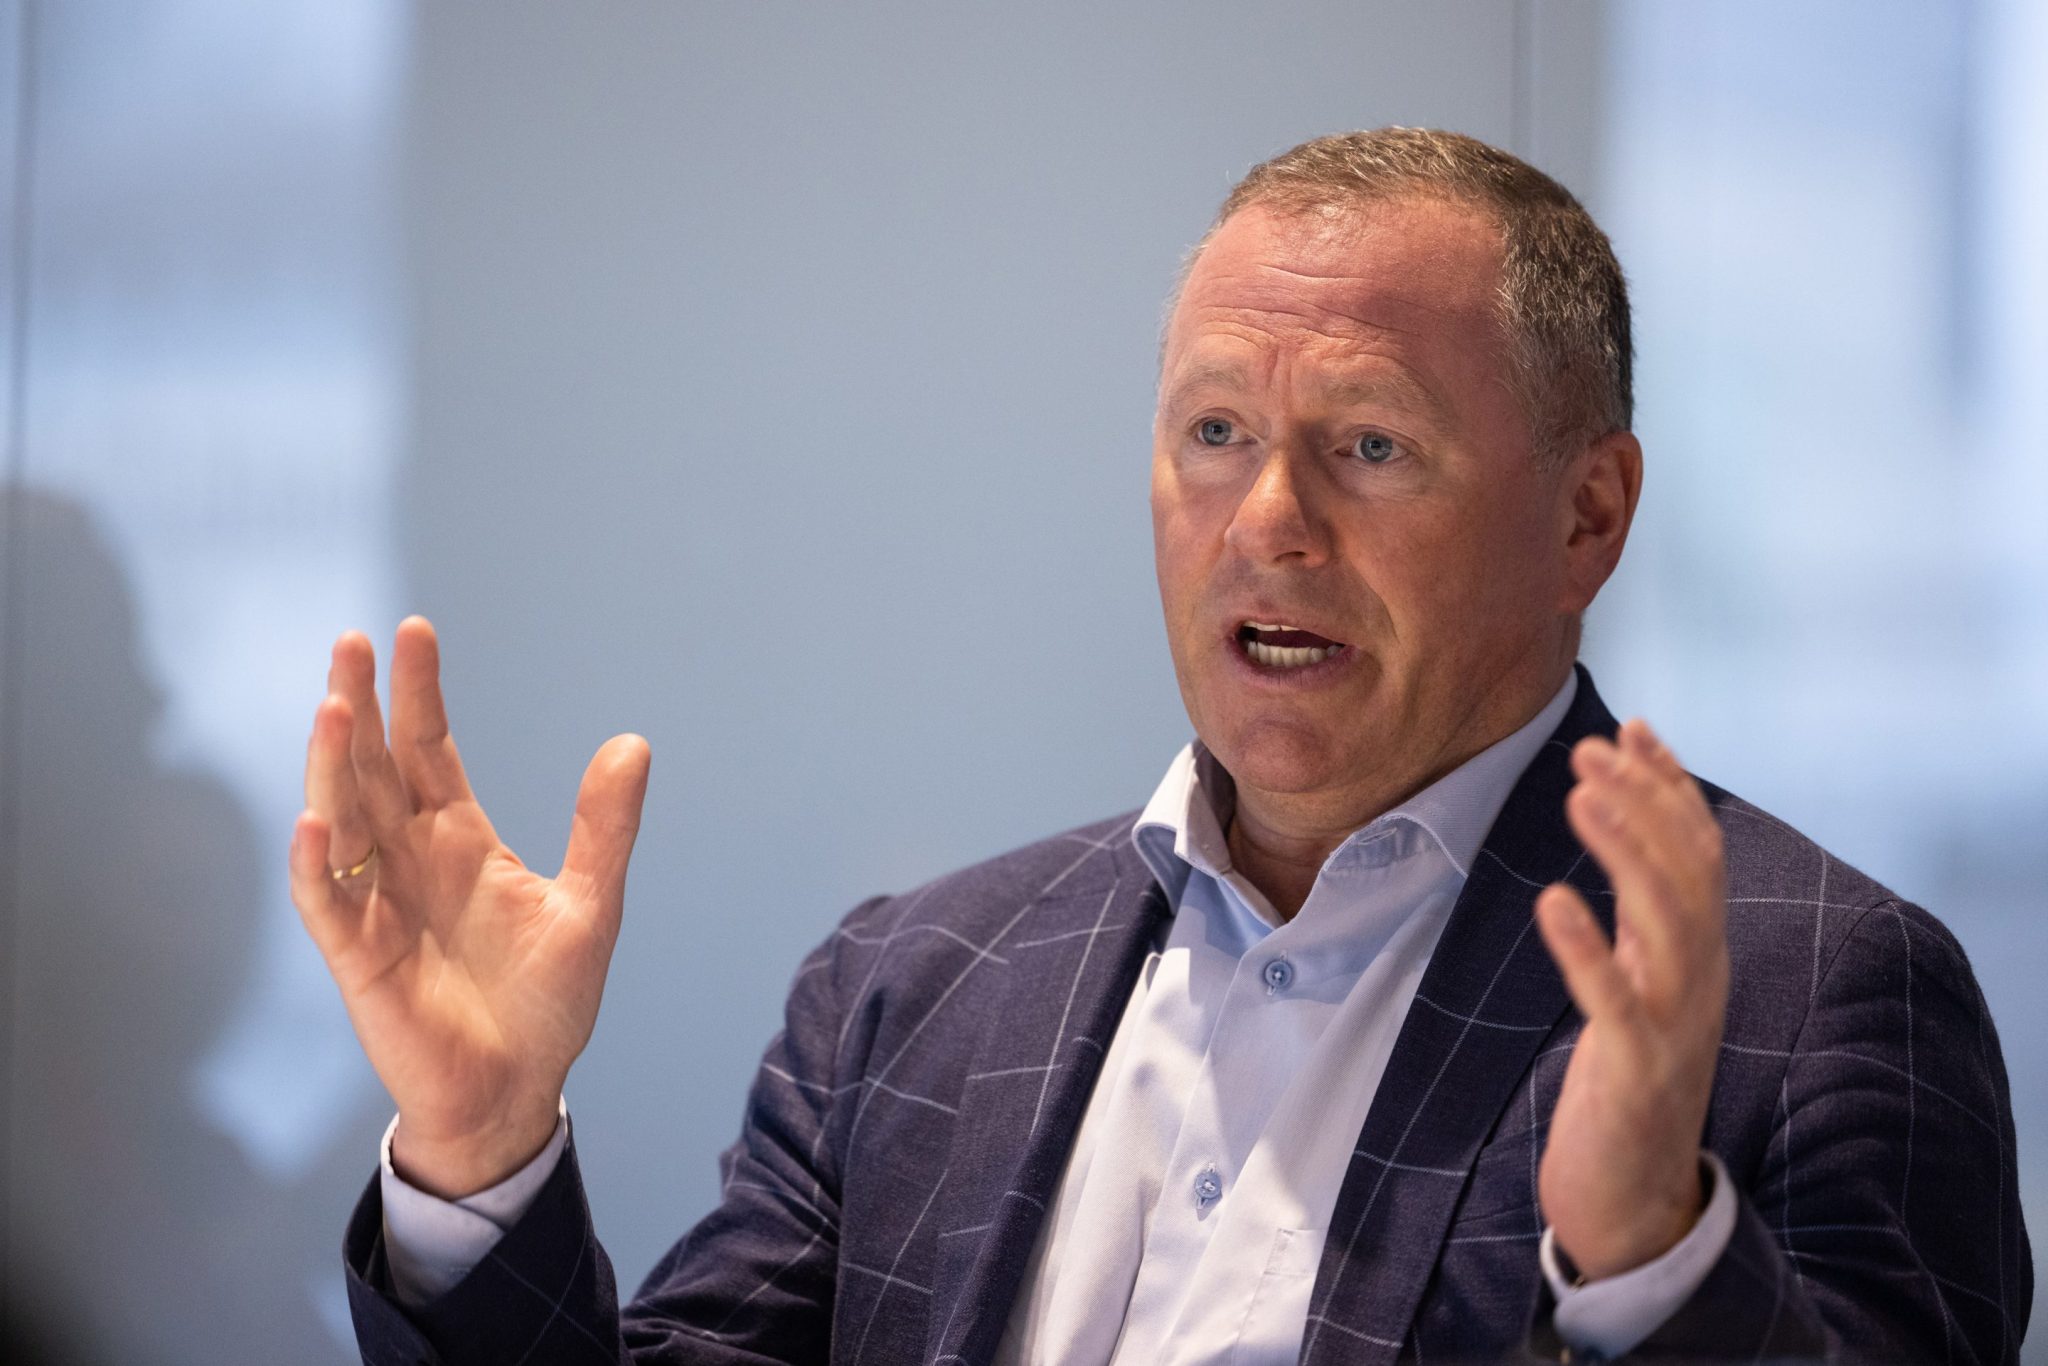 norway’s $1.6tn oil fund ceo—who said americans work harder than europeans—has a countdown in his office to show how many days he has left on the job